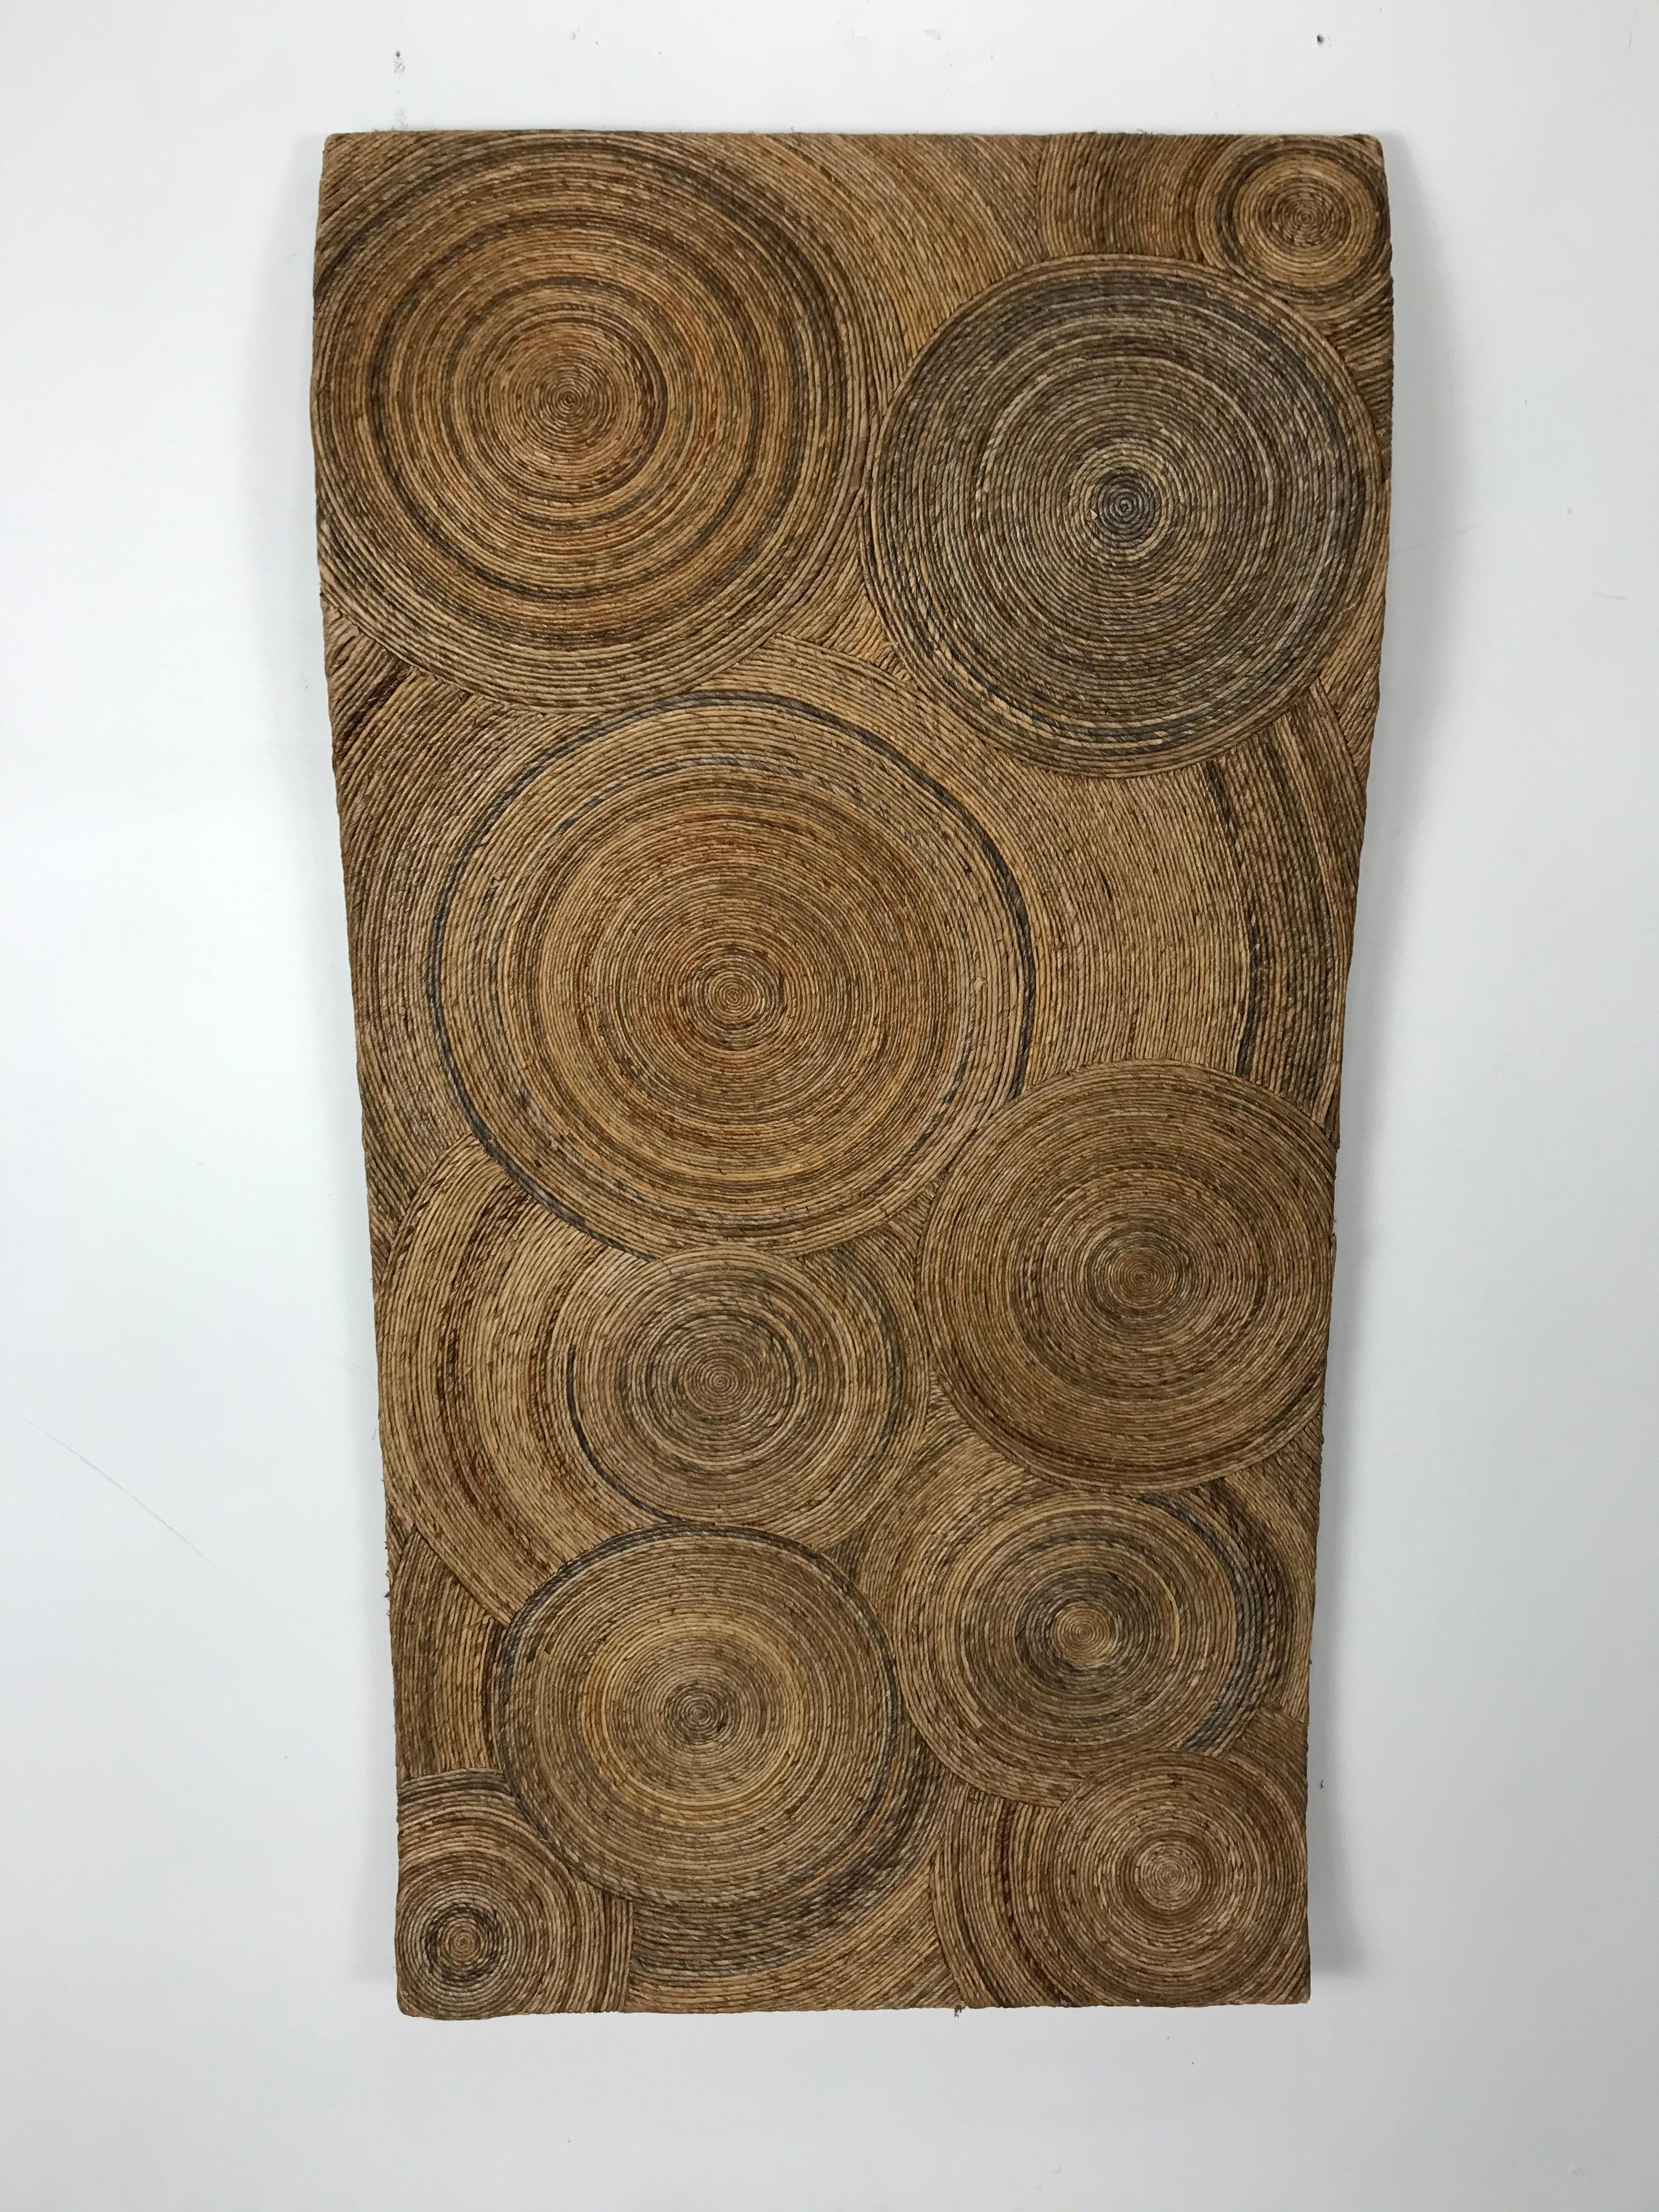 Unusual rope, paper cord. Jute 'CROP cIRCLE' and wave wall sculpture. Artist unknown, amazing quality and construction, wonderful coloration, patina. Can be hung vertically or horizontally.